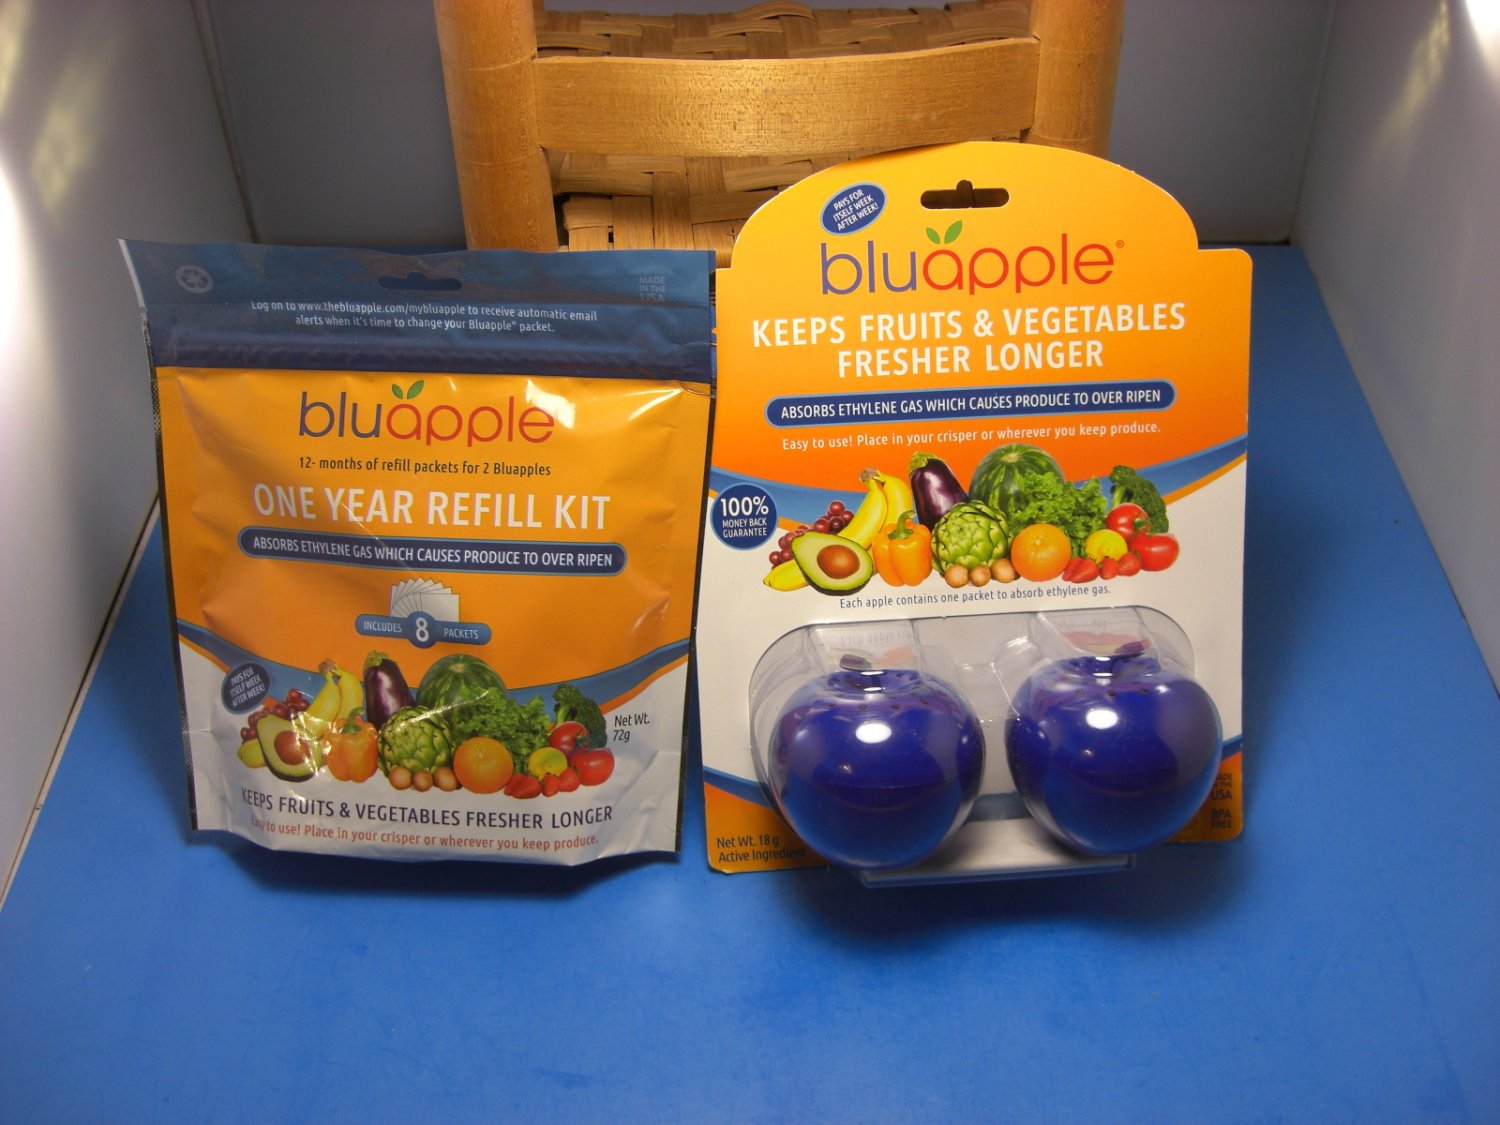 Bluapple Blue Produce Balls to Keep Fruits Longer/One Year Refill Kit